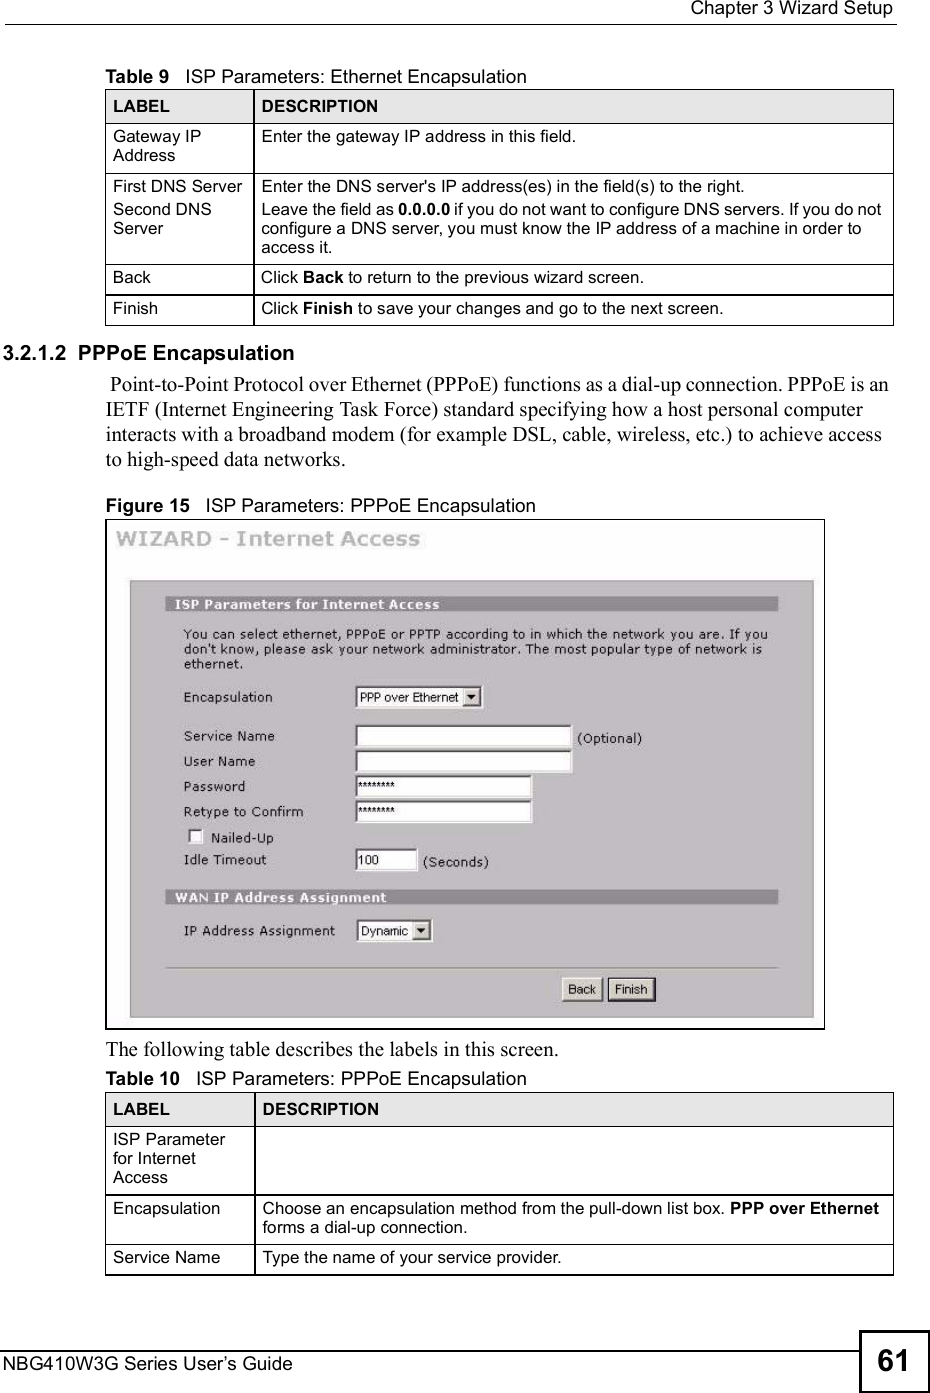  Chapter 3Wizard SetupNBG410W3G Series User s Guide 613.2.1.2  PPPoE Encapsulation Point-to-Point Protocol over Ethernet (PPPoE) functions as a dial-up connection. PPPoE is an IETF (Internet Engineering Task Force) standard specifying how a host personal computer interacts with a broadband modem (for example DSL, cable, wireless, etc.) to achieve access to high-speed data networks. Figure 15   ISP Parameters: PPPoE EncapsulationThe following table describes the labels in this screen.Gateway IP Address Enter the gateway IP address in this field. First DNS ServerSecond DNS ServerEnter the DNS server&apos;s IP address(es) in the field(s) to the right.Leave the field as 0.0.0.0 if you do not want to configure DNS servers. If you do not configure a DNS server, you must know the IP address of a machine in order to access it.BackClick Back to return to the previous wizard screen.FinishClick Finish to save your changes and go to the next screen. Table 9   ISP Parameters: Ethernet EncapsulationLABEL DESCRIPTIONTable 10   ISP Parameters: PPPoE EncapsulationLABEL DESCRIPTIONISP Parameter for Internet AccessEncapsulationChoose an encapsulation method from the pull-down list box. PPP over Ethernet forms a dial-up connection. Service Name Type the name of your service provider.